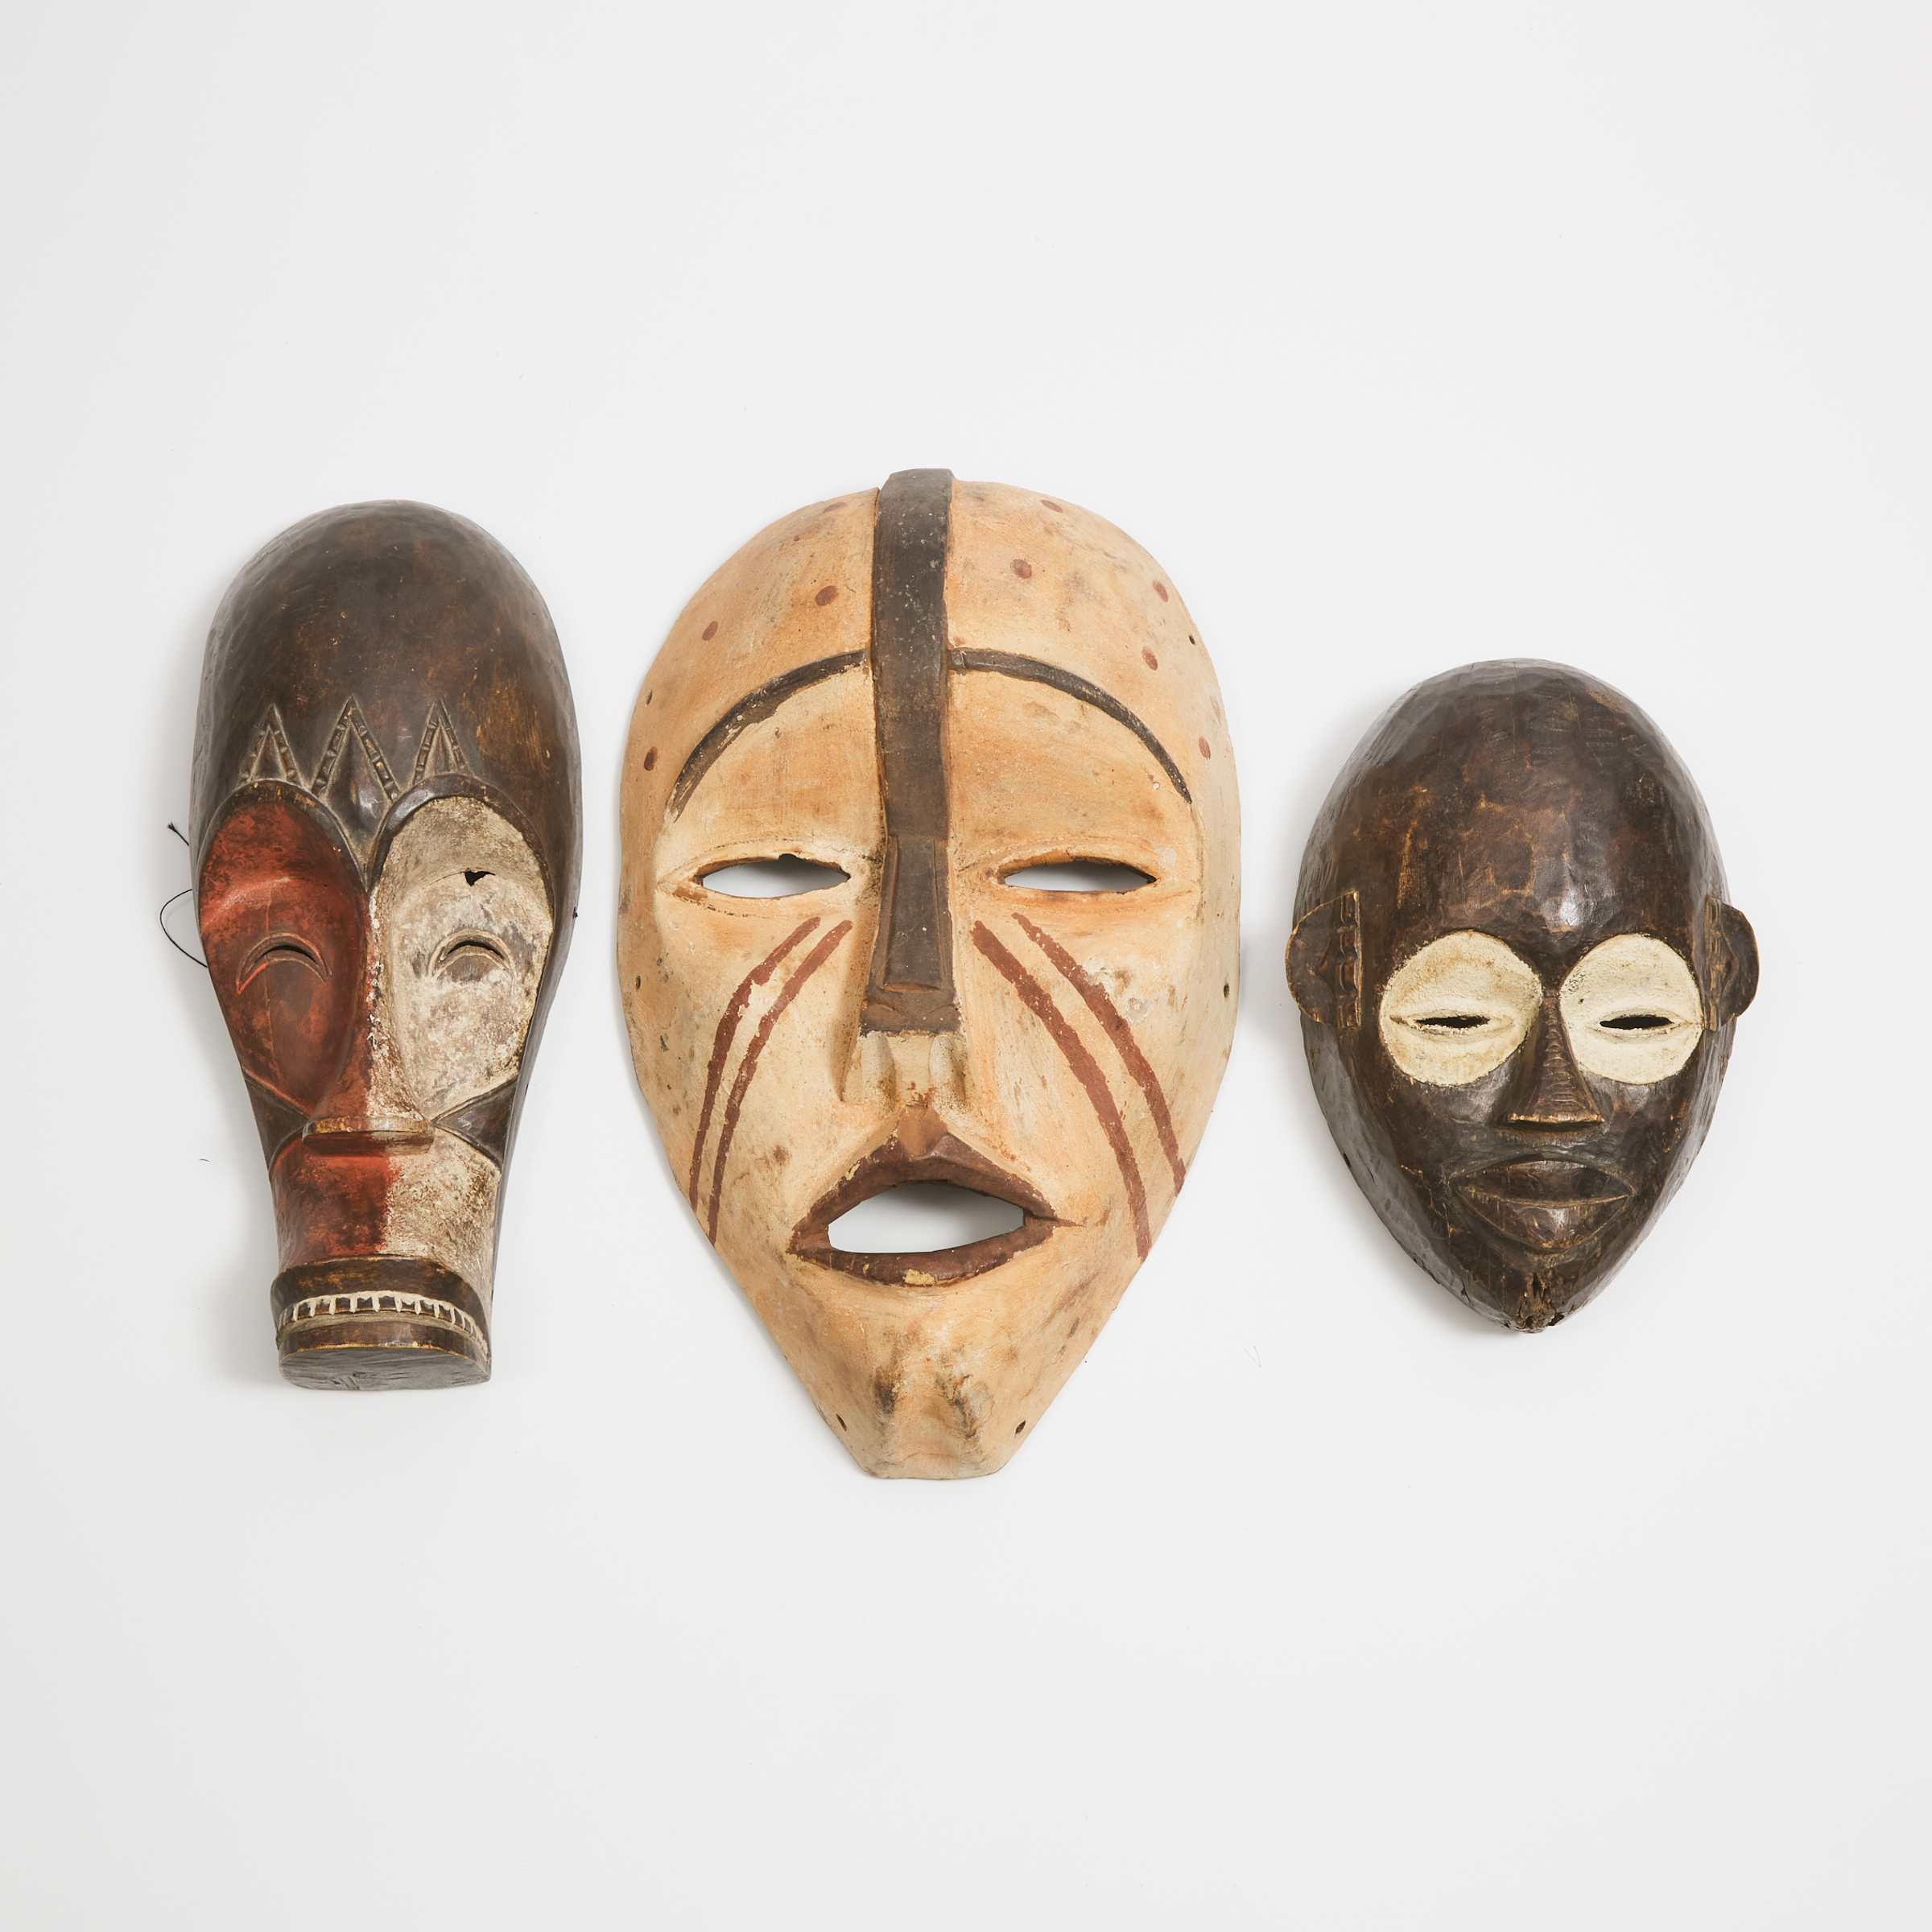 Group of Three African Masks including one Fang and one Kongo mask, 20th century